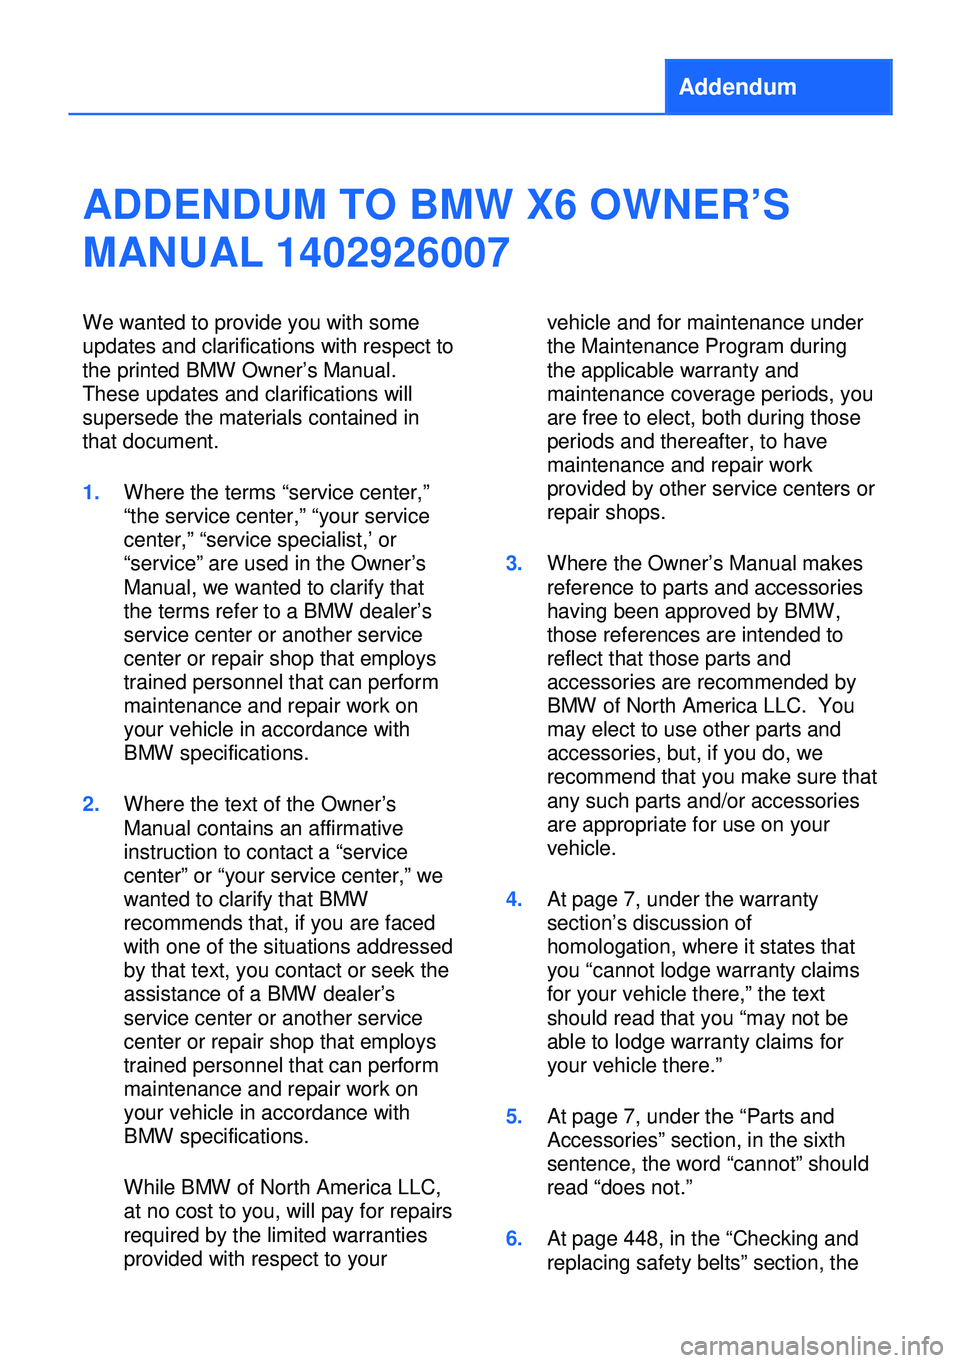 BMW X6M 2013 E71 Owners Manual Addendum
ADDENDUM TO BMW X6 OWNER’S
MANUAL 1402926007
We wanted to provide you with some
updates and clarifications with respect to
the printed BMW Owner’s Manual.
These updates and clarifications